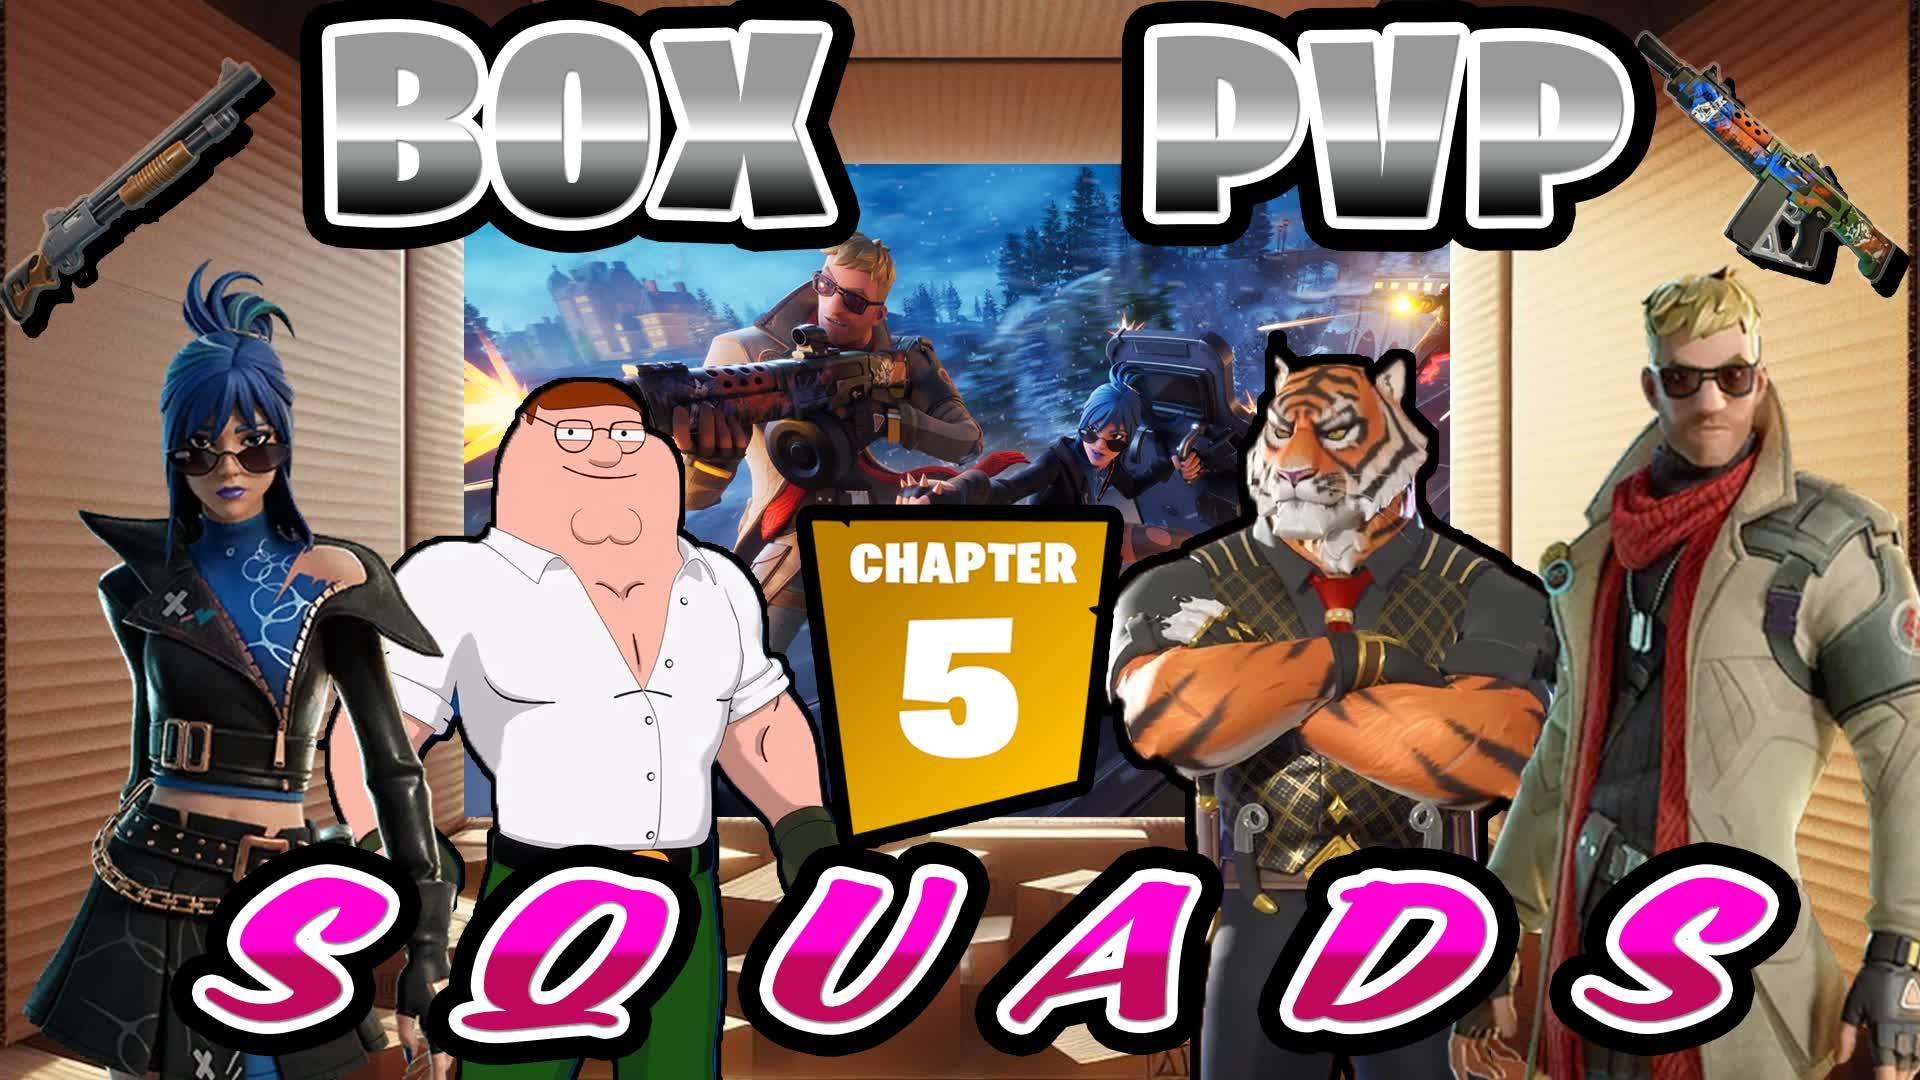 CHAPTER 5 BOX PVP-SQUADS